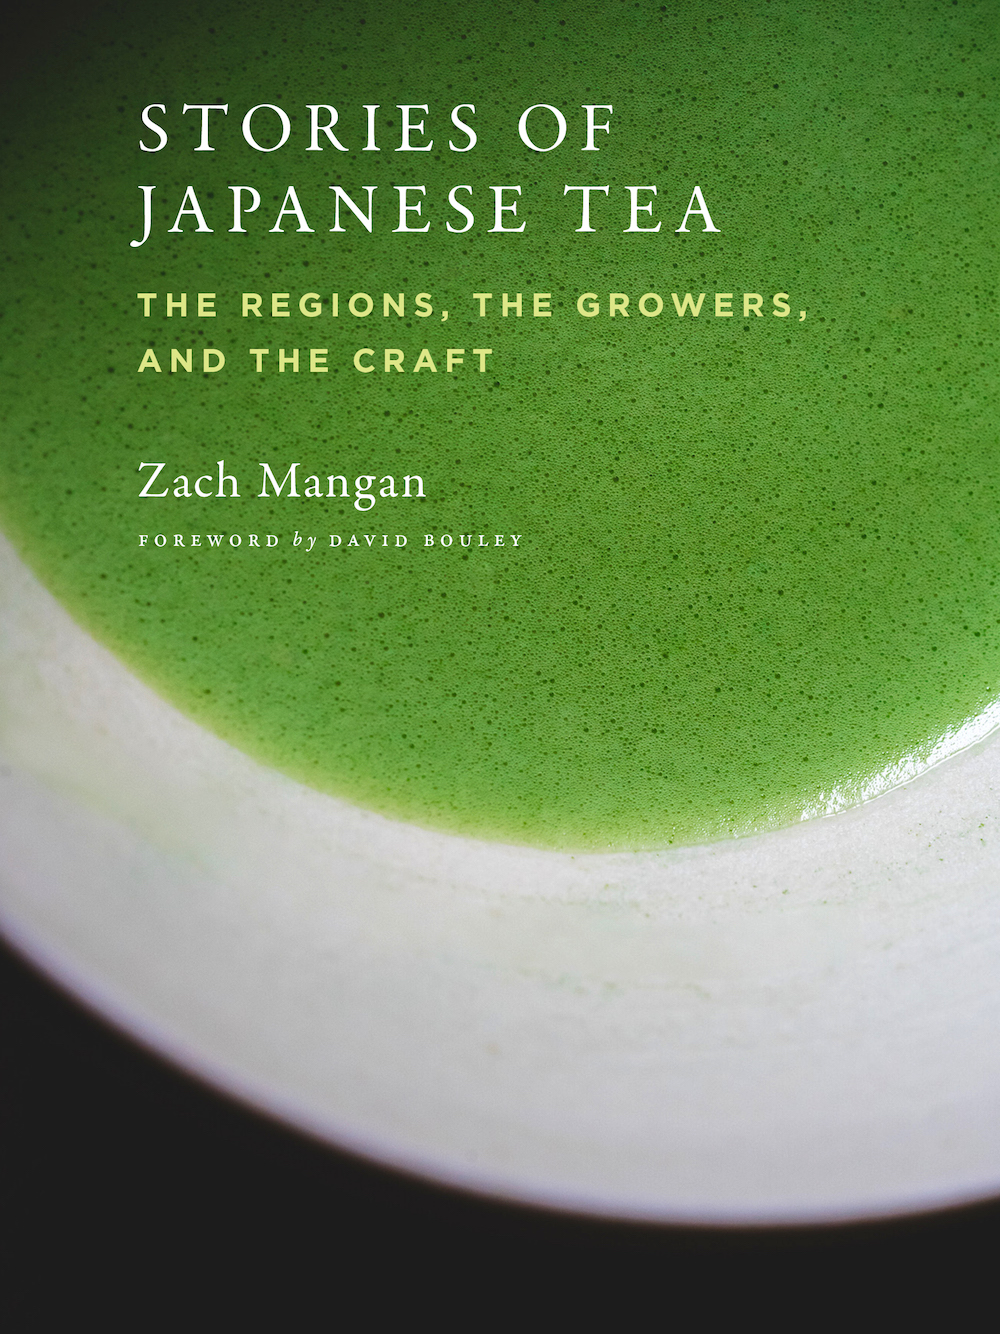 IC Book Signing: Stories of Japanese Tea by Zach Mangan